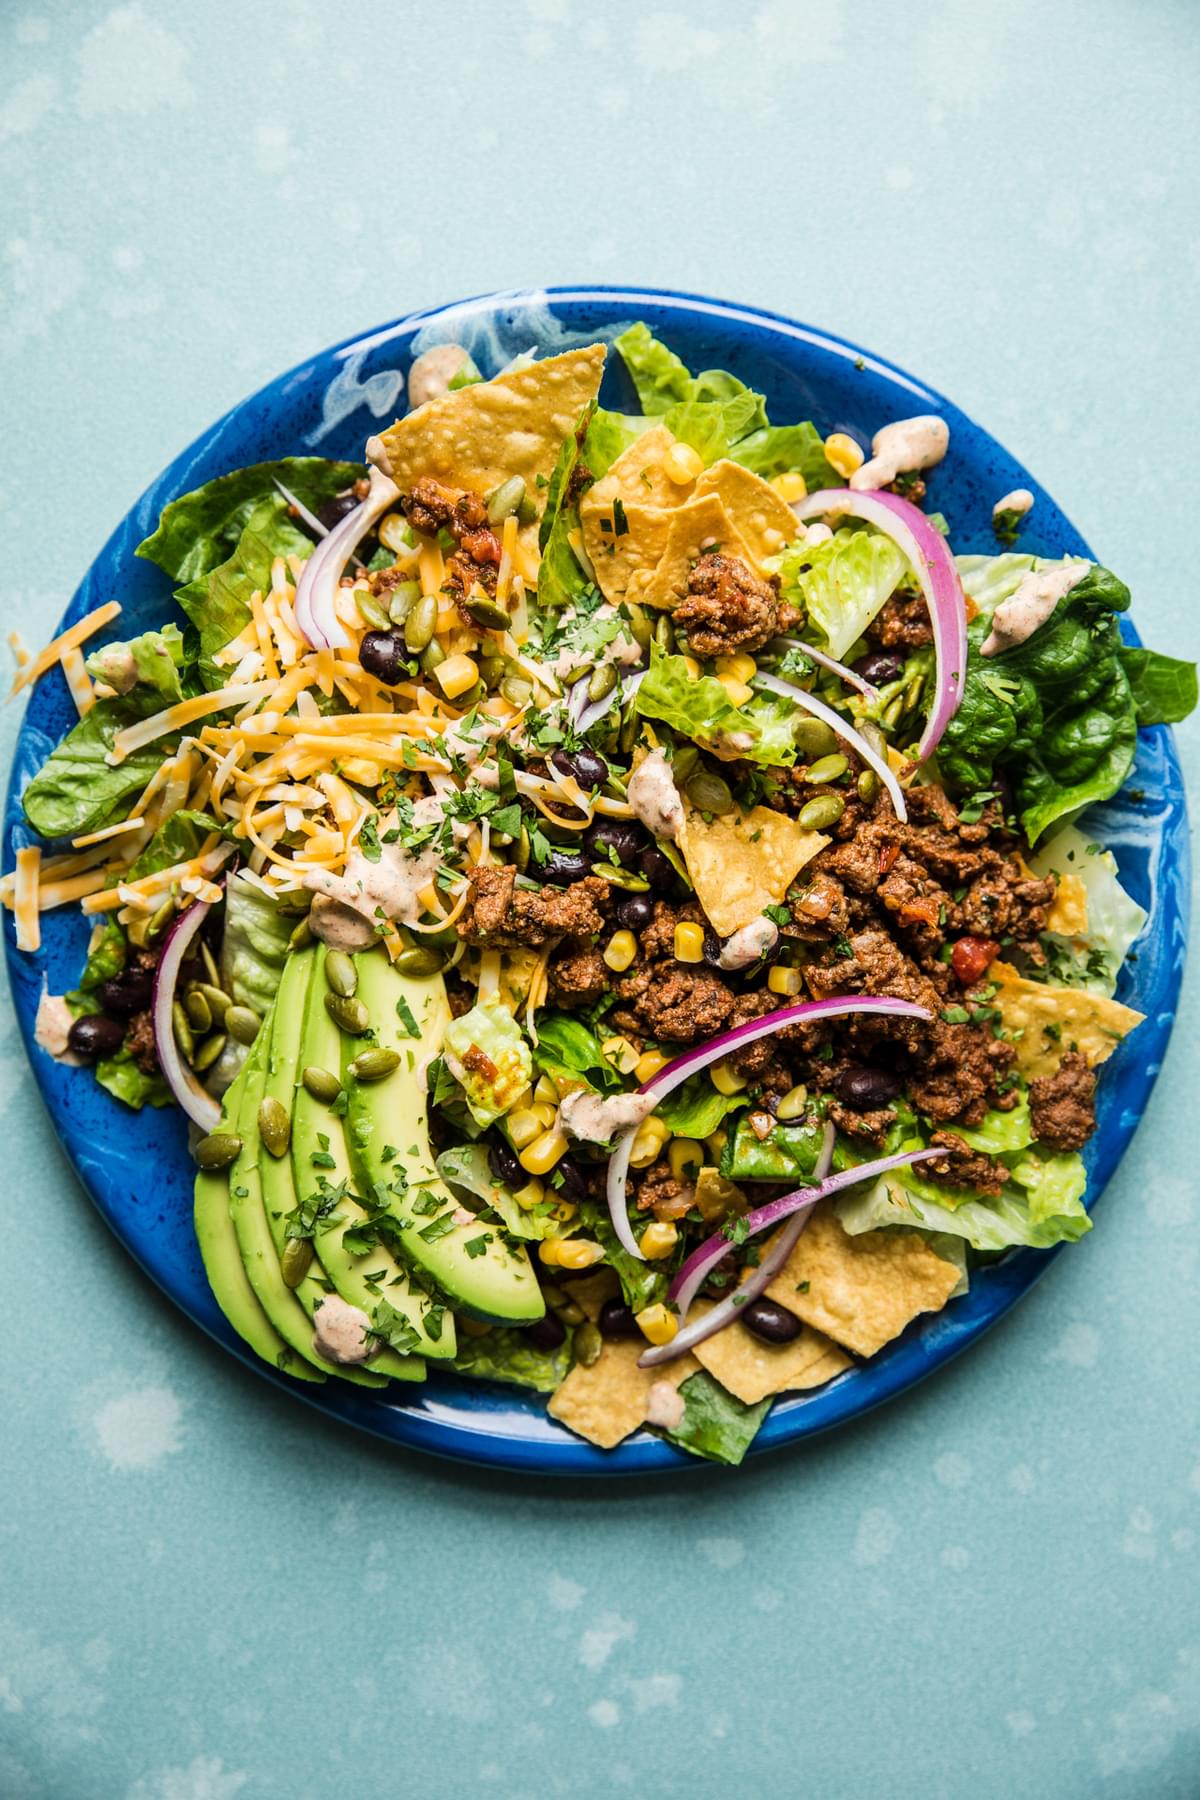 homemade taco salad recipe with corn, beans, tortilla chips, avocado and sour cream, cheese and ground taco meat